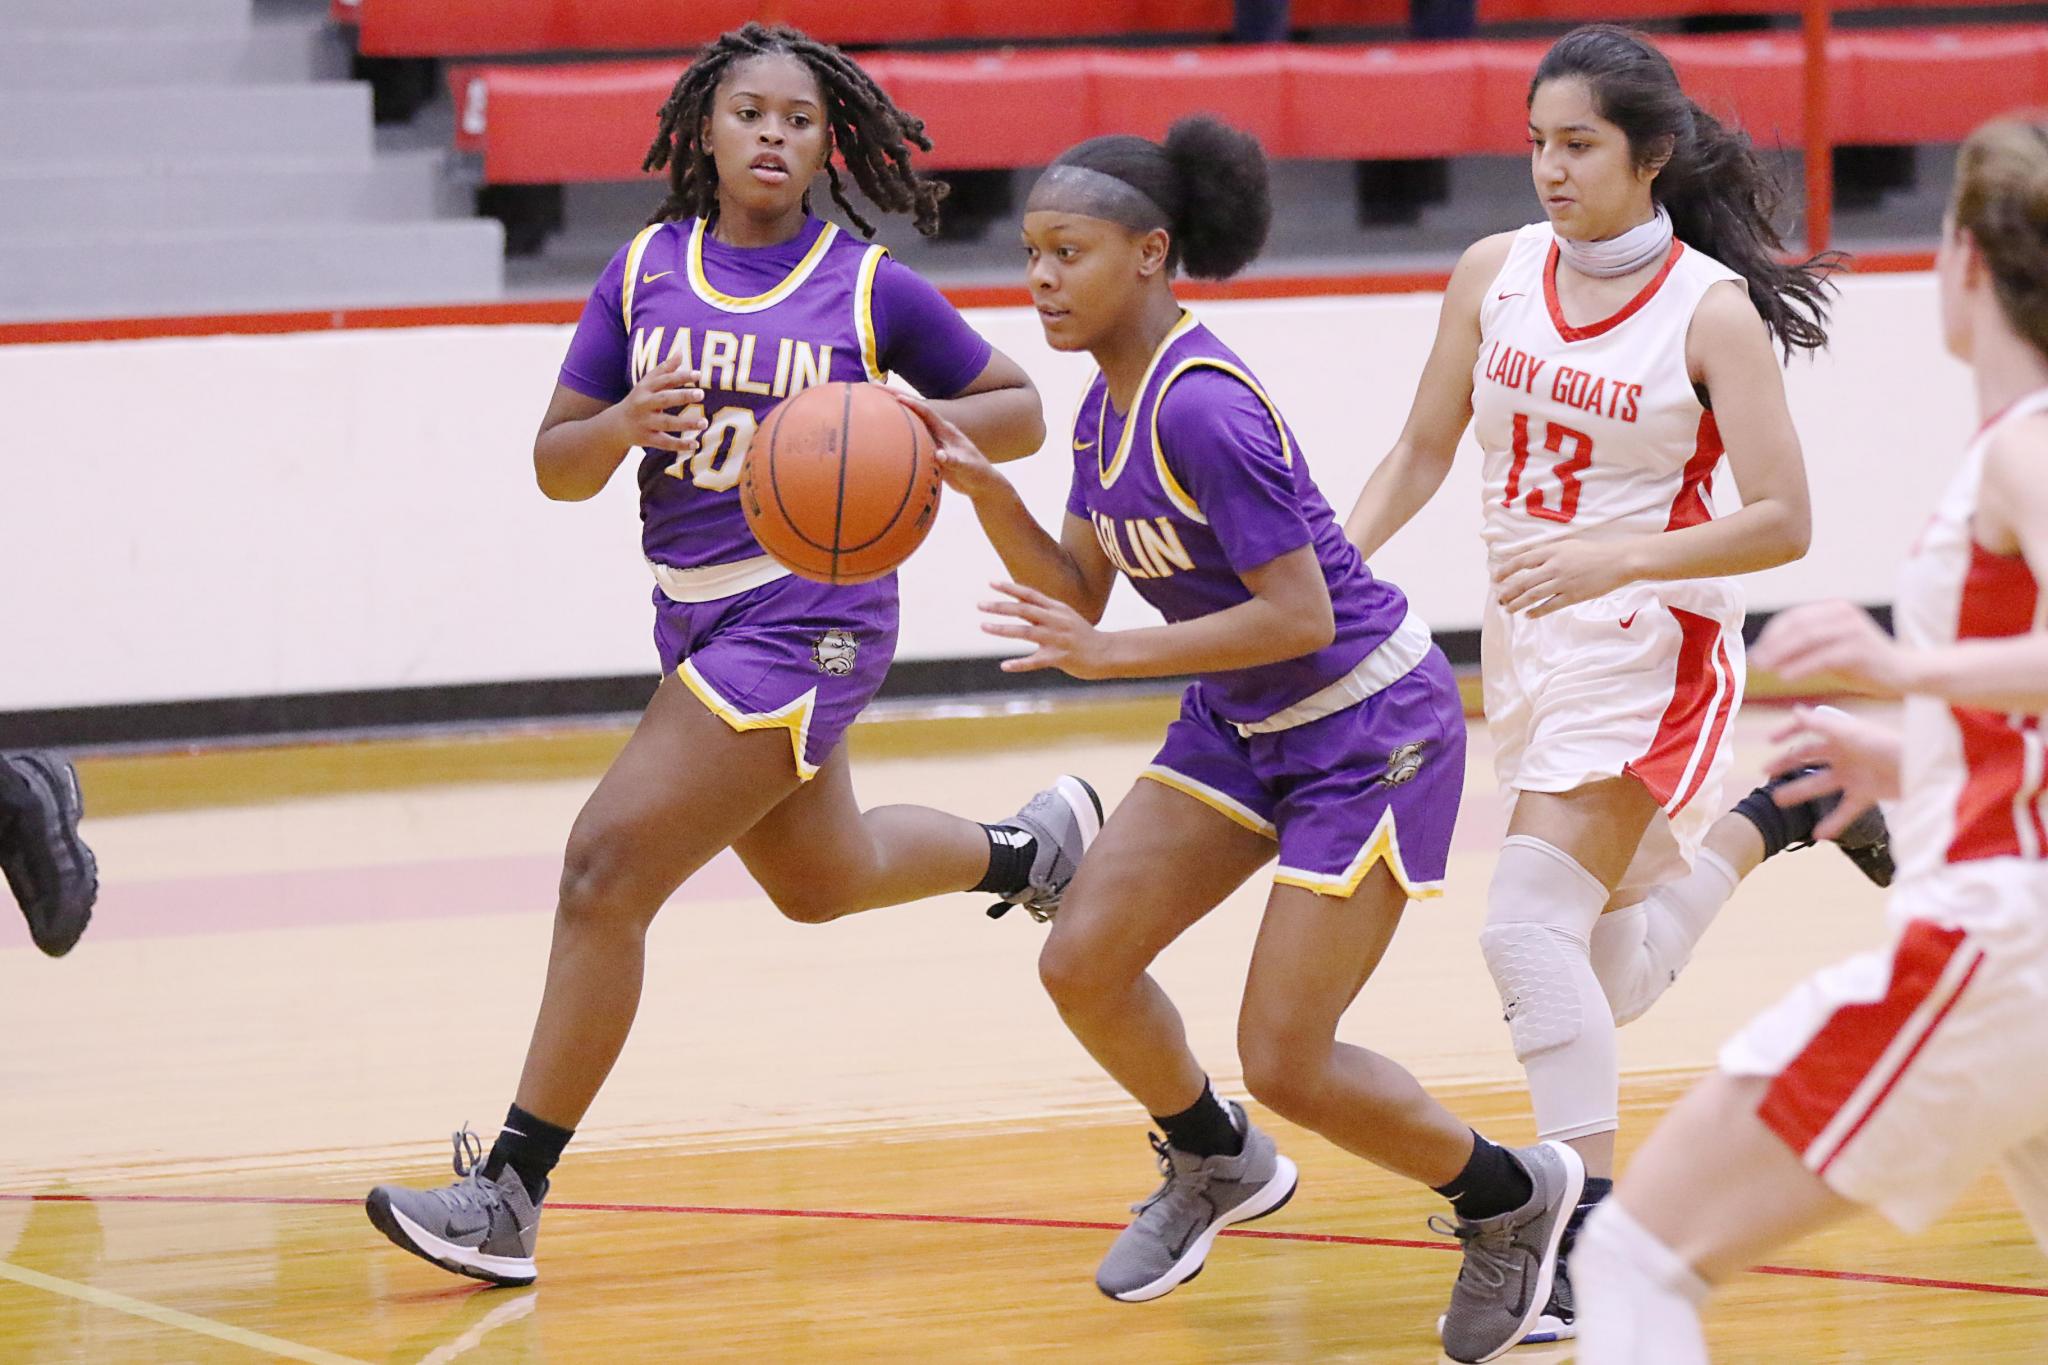 Marlin's Aniya Williams dribbles up the court against Groesbeck in a non-district game Friday night. The 6-foot-1 senior scored 23 points to lead the Lady Bulldogs to a 59-47 victory.Photo by Angela Crane/For the Marlin Democrat